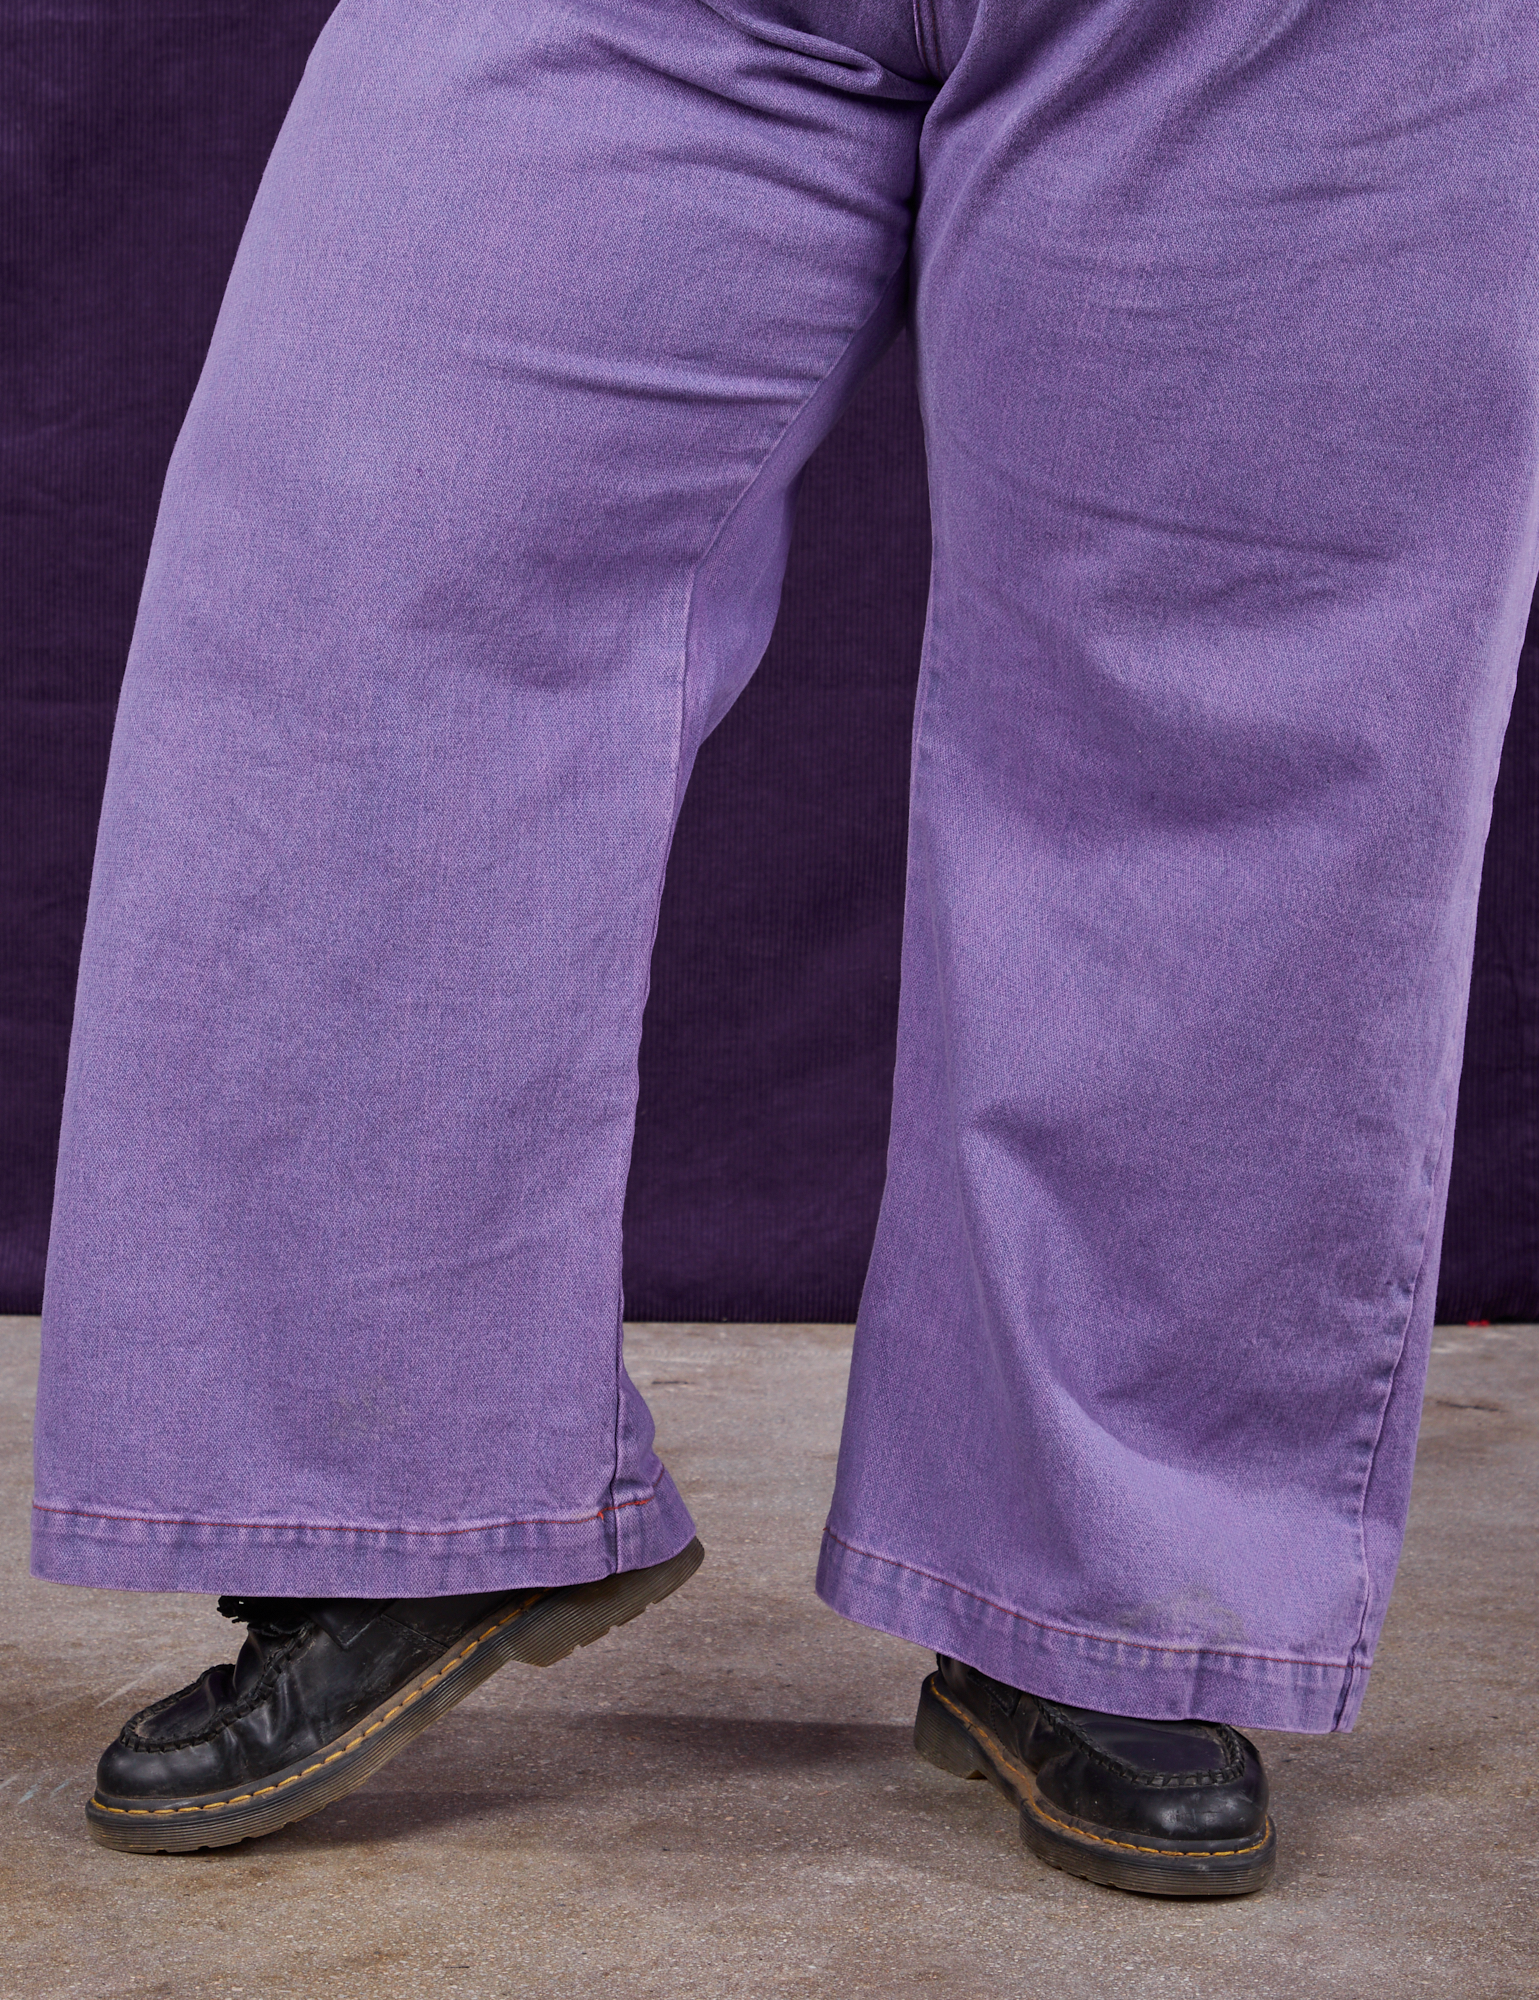 Overdyed Wide Leg Trousers in Faded Grape pant leg close up on Sam